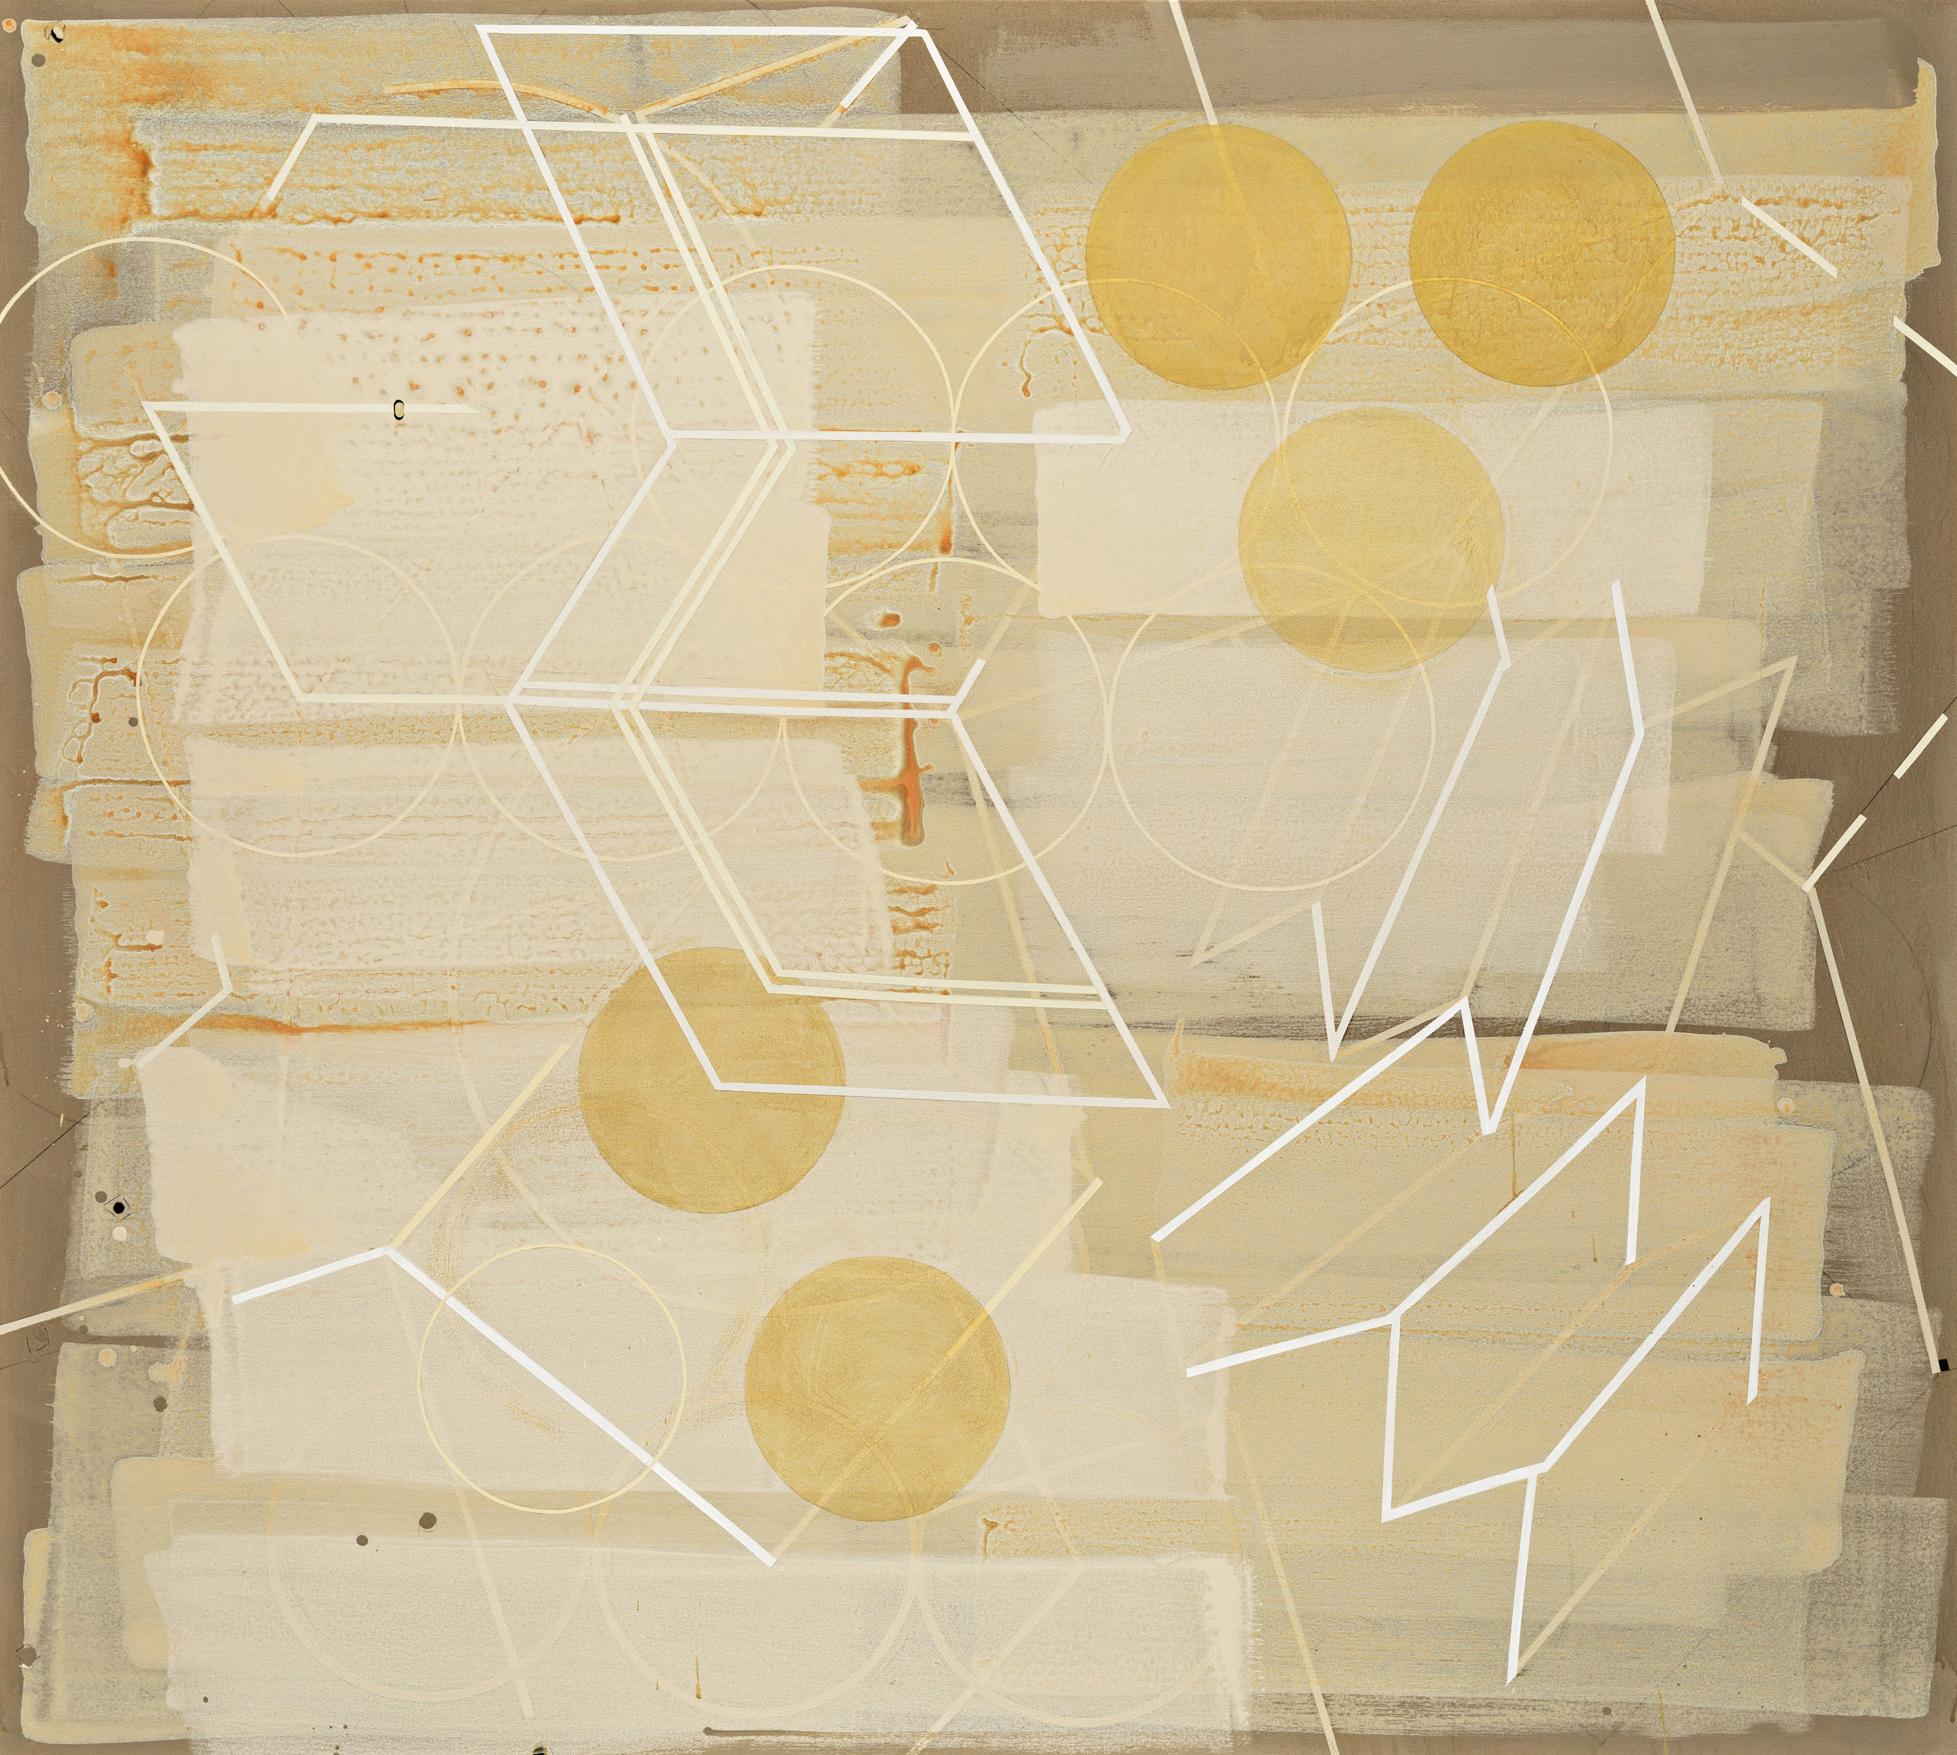 Passing Through #2 (Geometric Abstract Painting in Yellow, Beige and White)